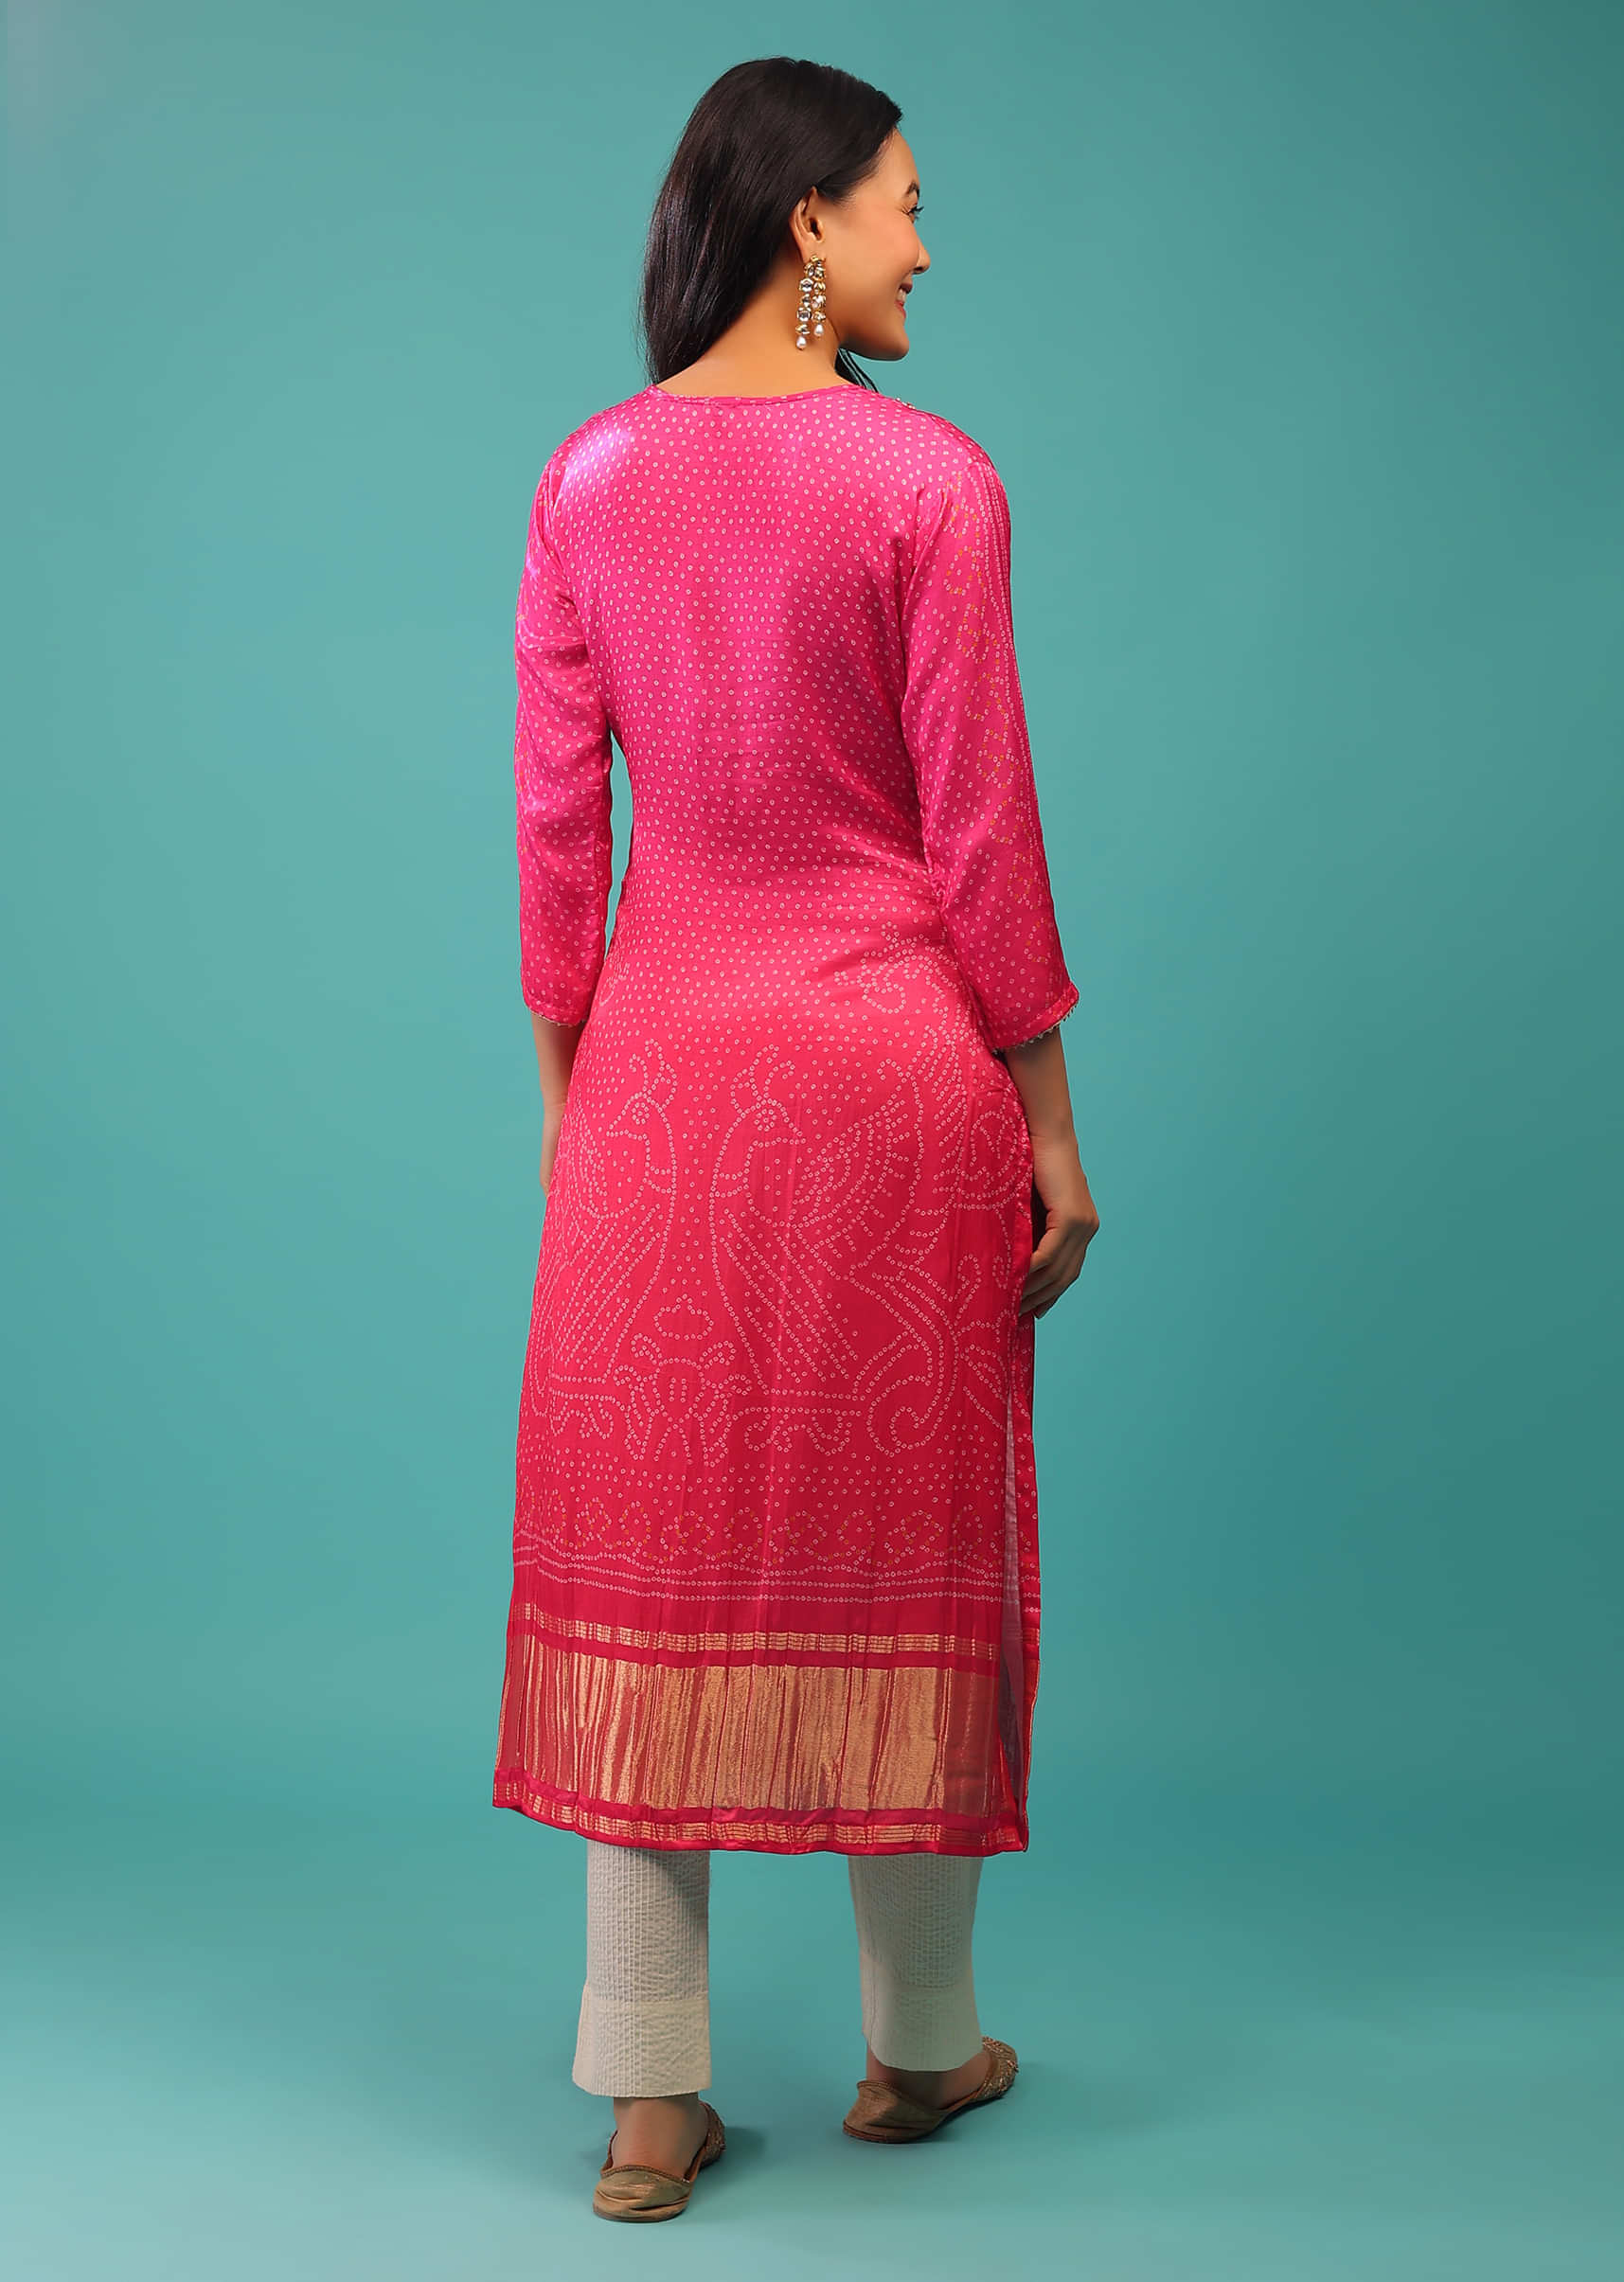 Hot Pink Kurti With Brocade Border In Gold Color